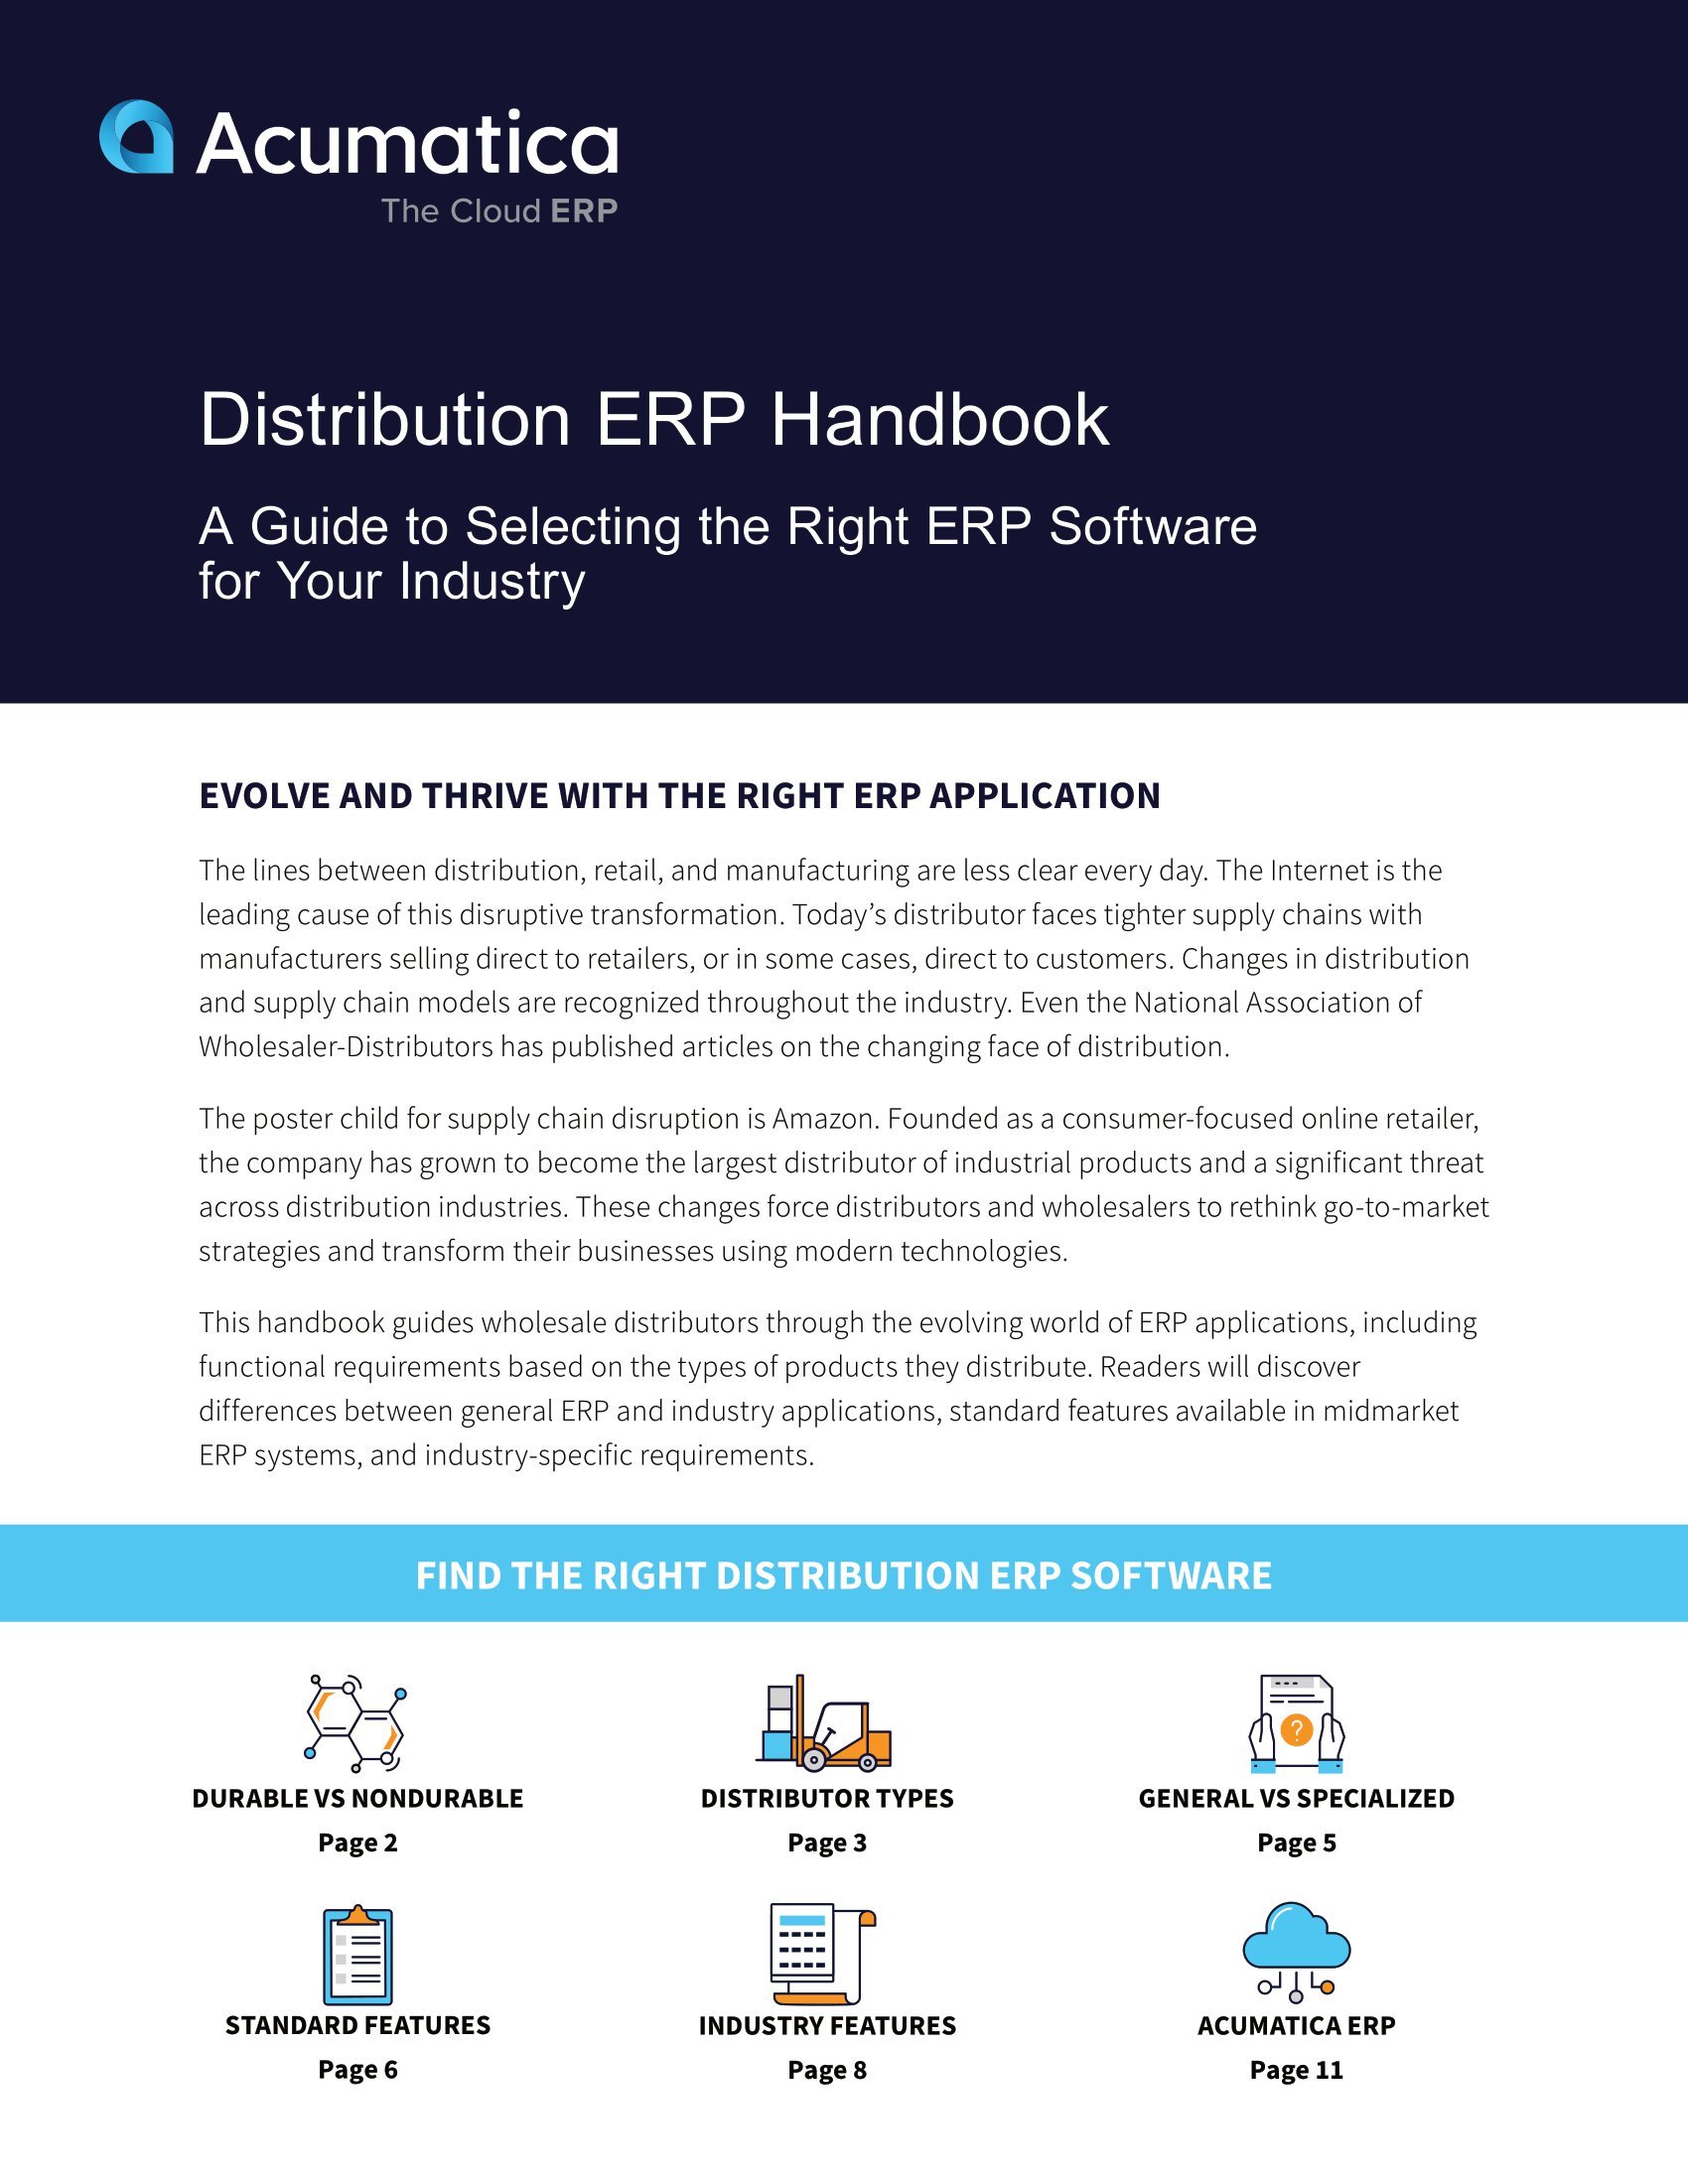 Distribution ERP Solutions: Find the Right Platform for Your Industry